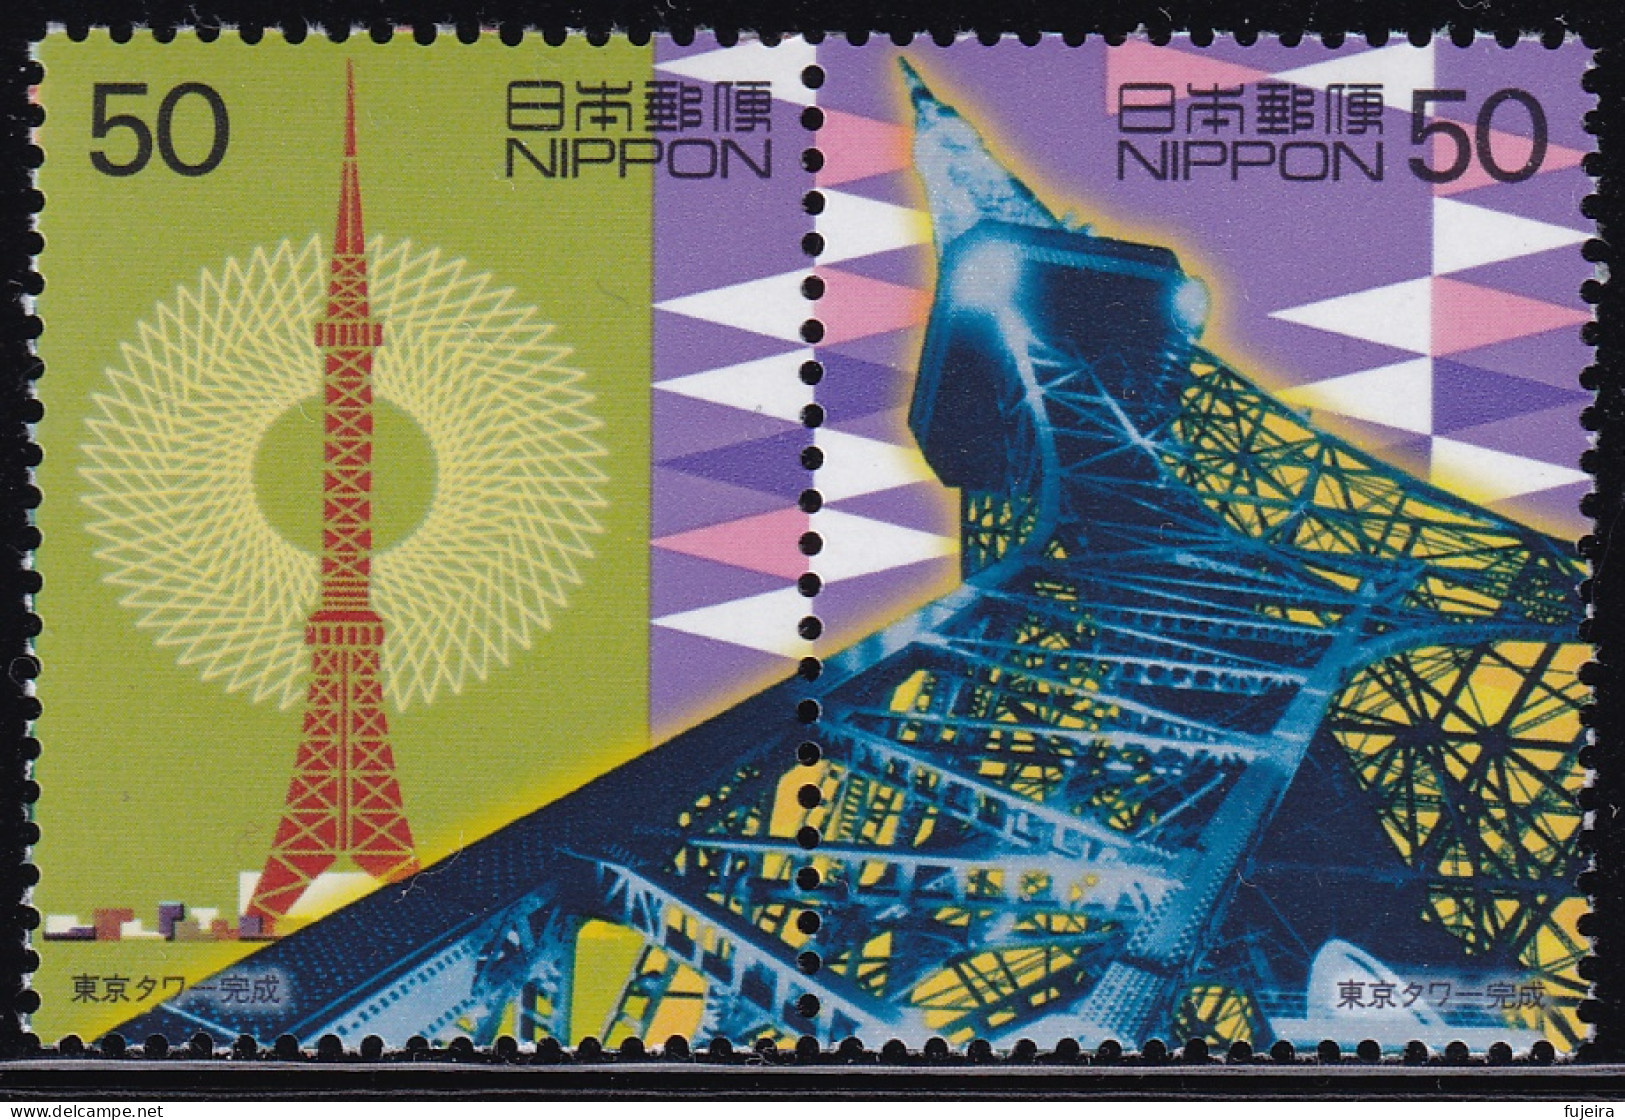 (ds92) Japan 20th Centurry No.11 Tokyo Tower MNH - Nuevos